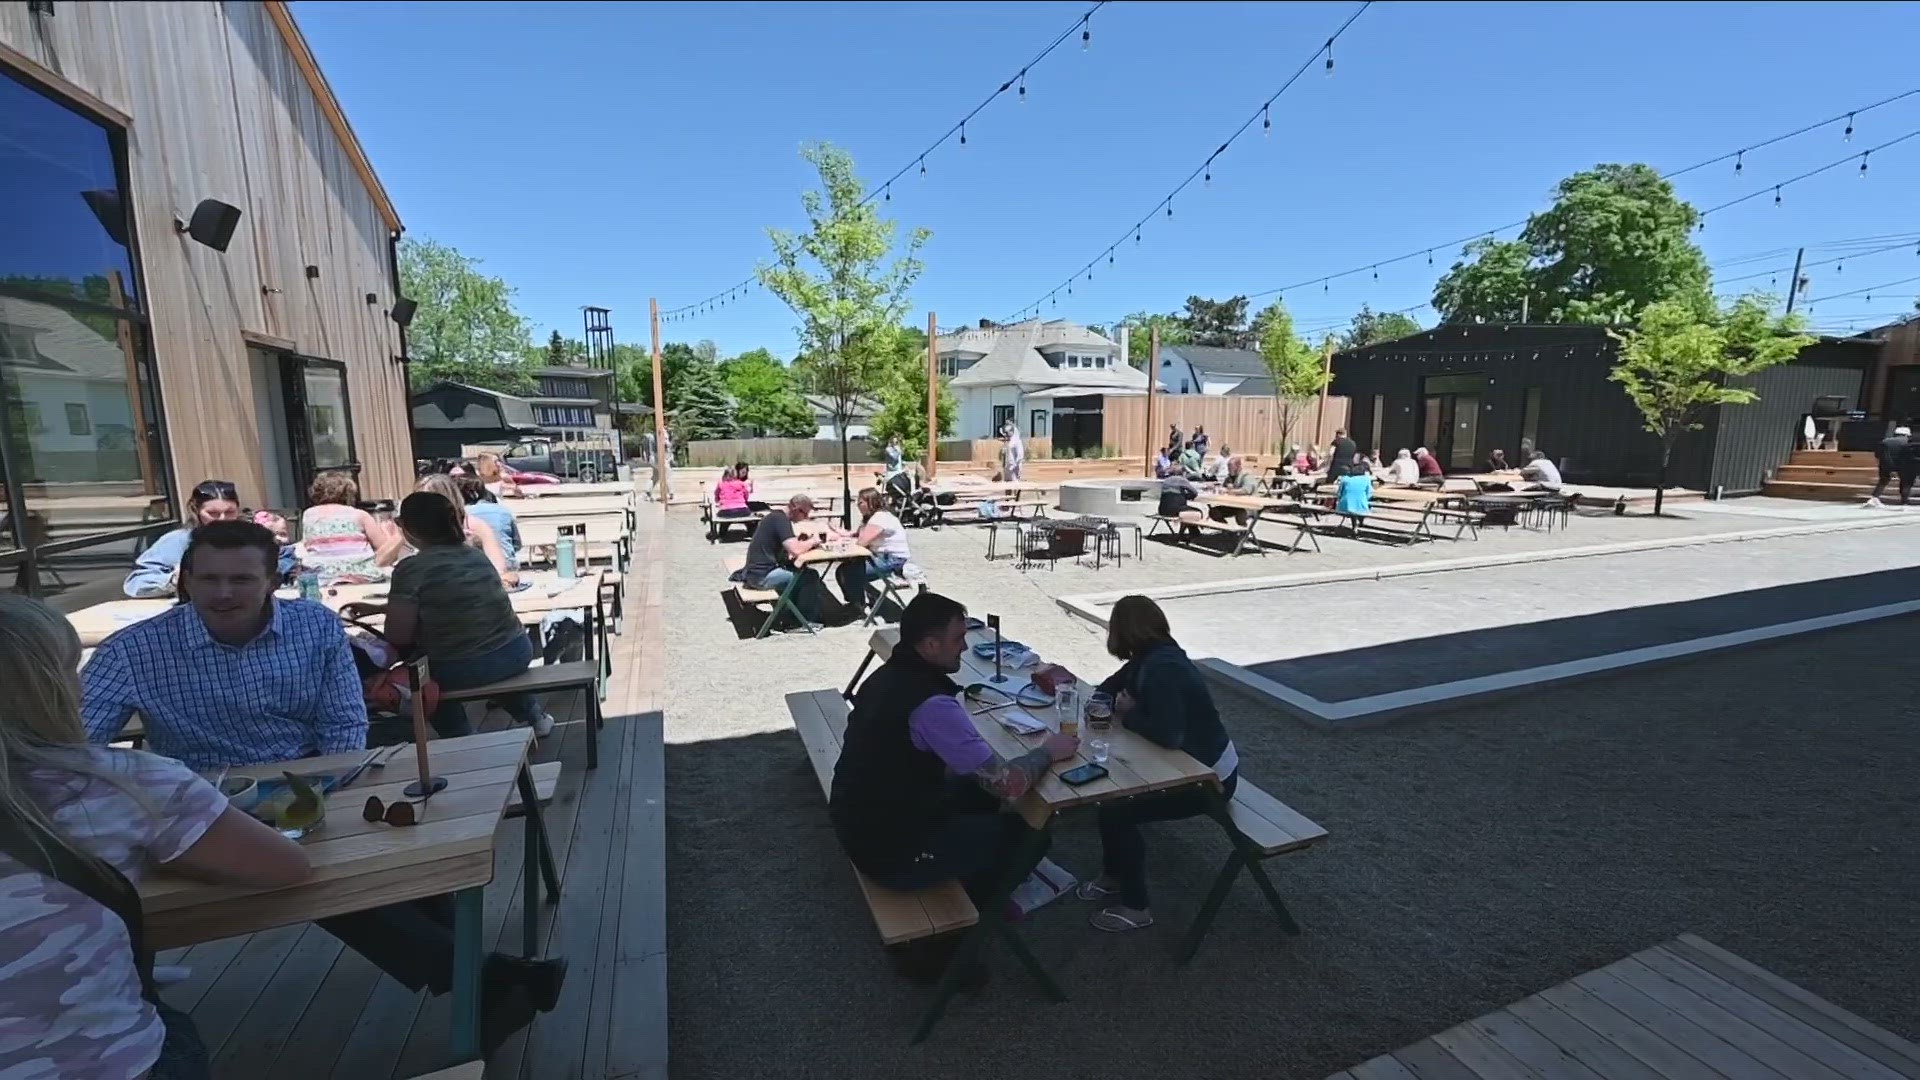 New Brewery in Orchard Park has plenty of outdoor space.